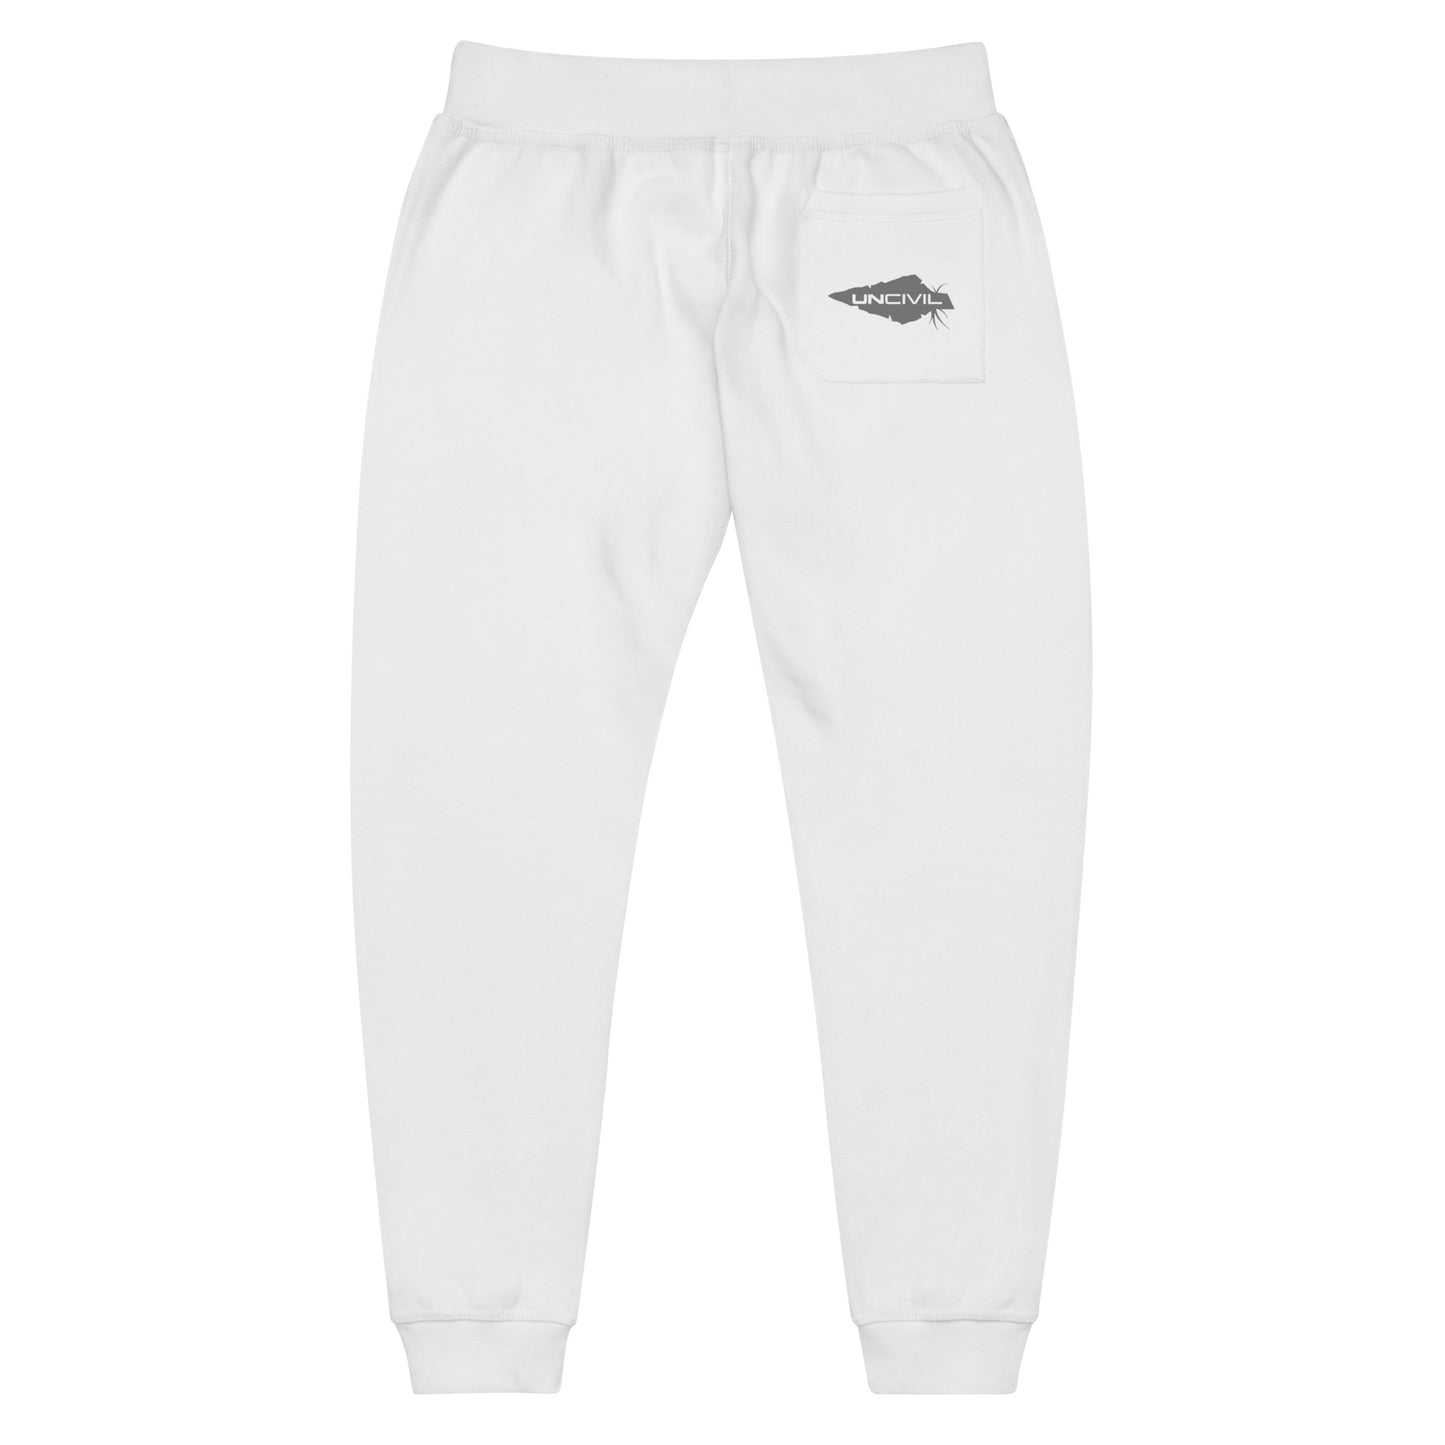 White sweatpants, UNCIVIL on front left leg and UNCIVIL patch on the back right pocket.